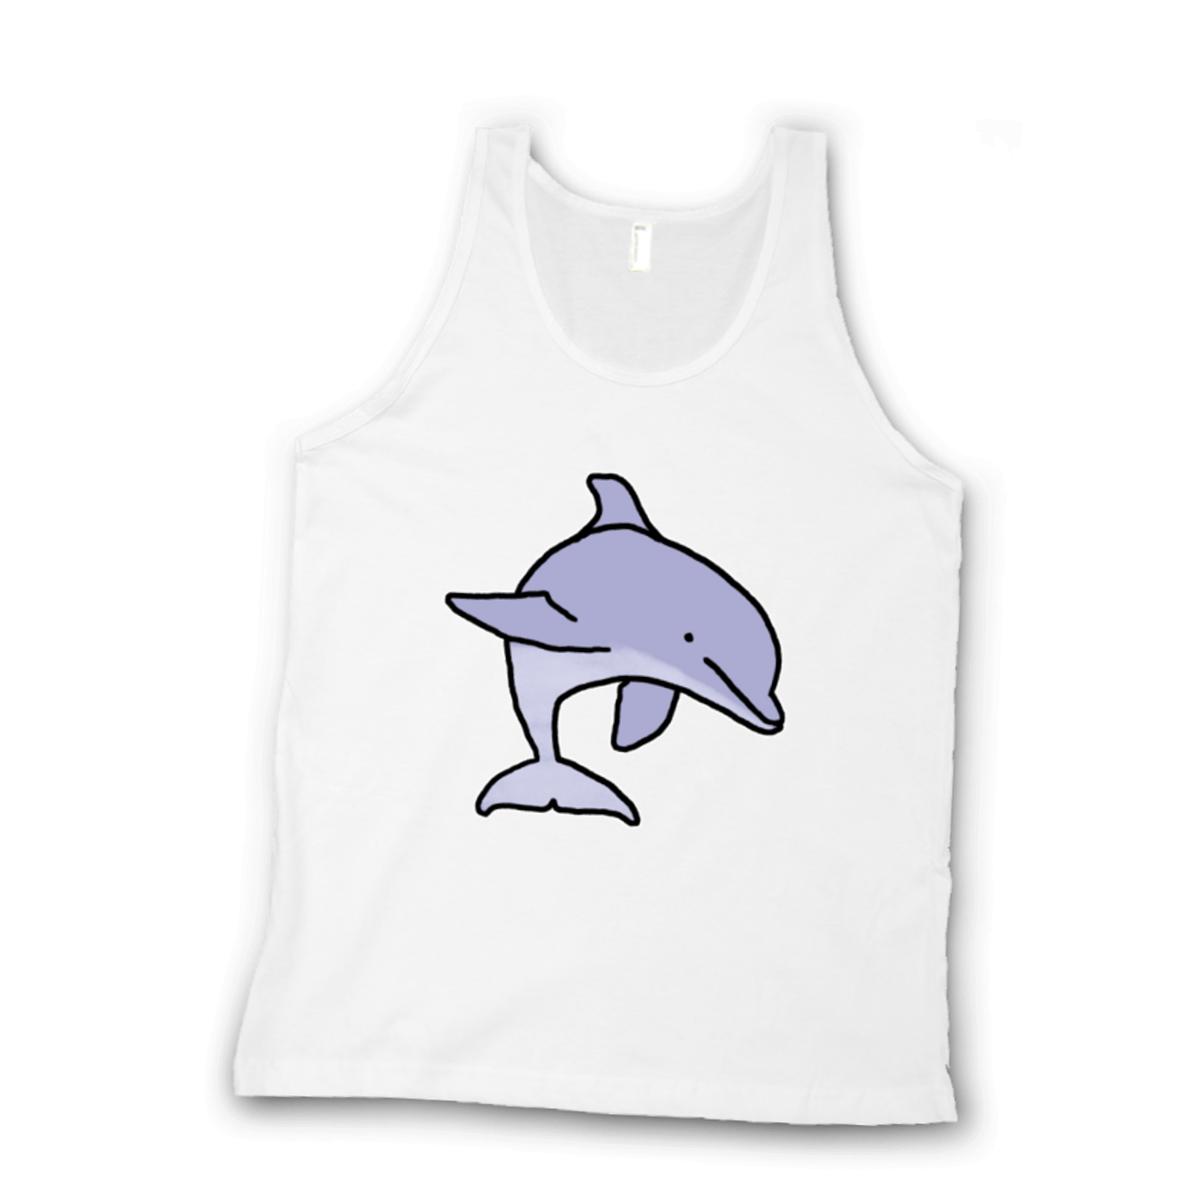 Dolphin Unisex Tank Top Extra Small white